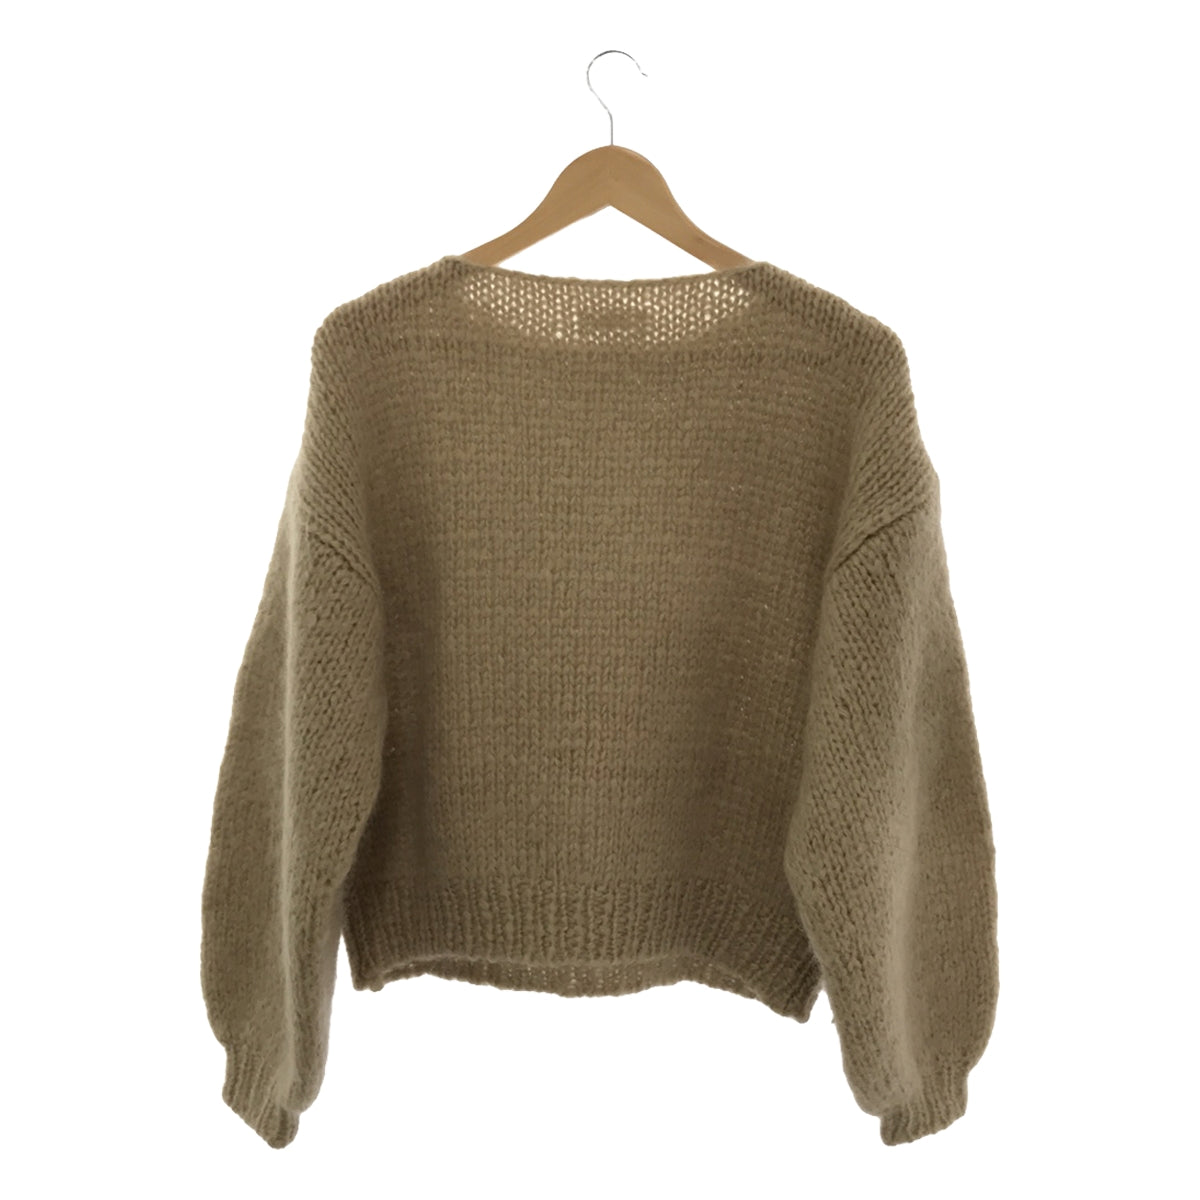 NOWOS / ノーウォス | 2019AW | Mohair pullover knit ニット | F 